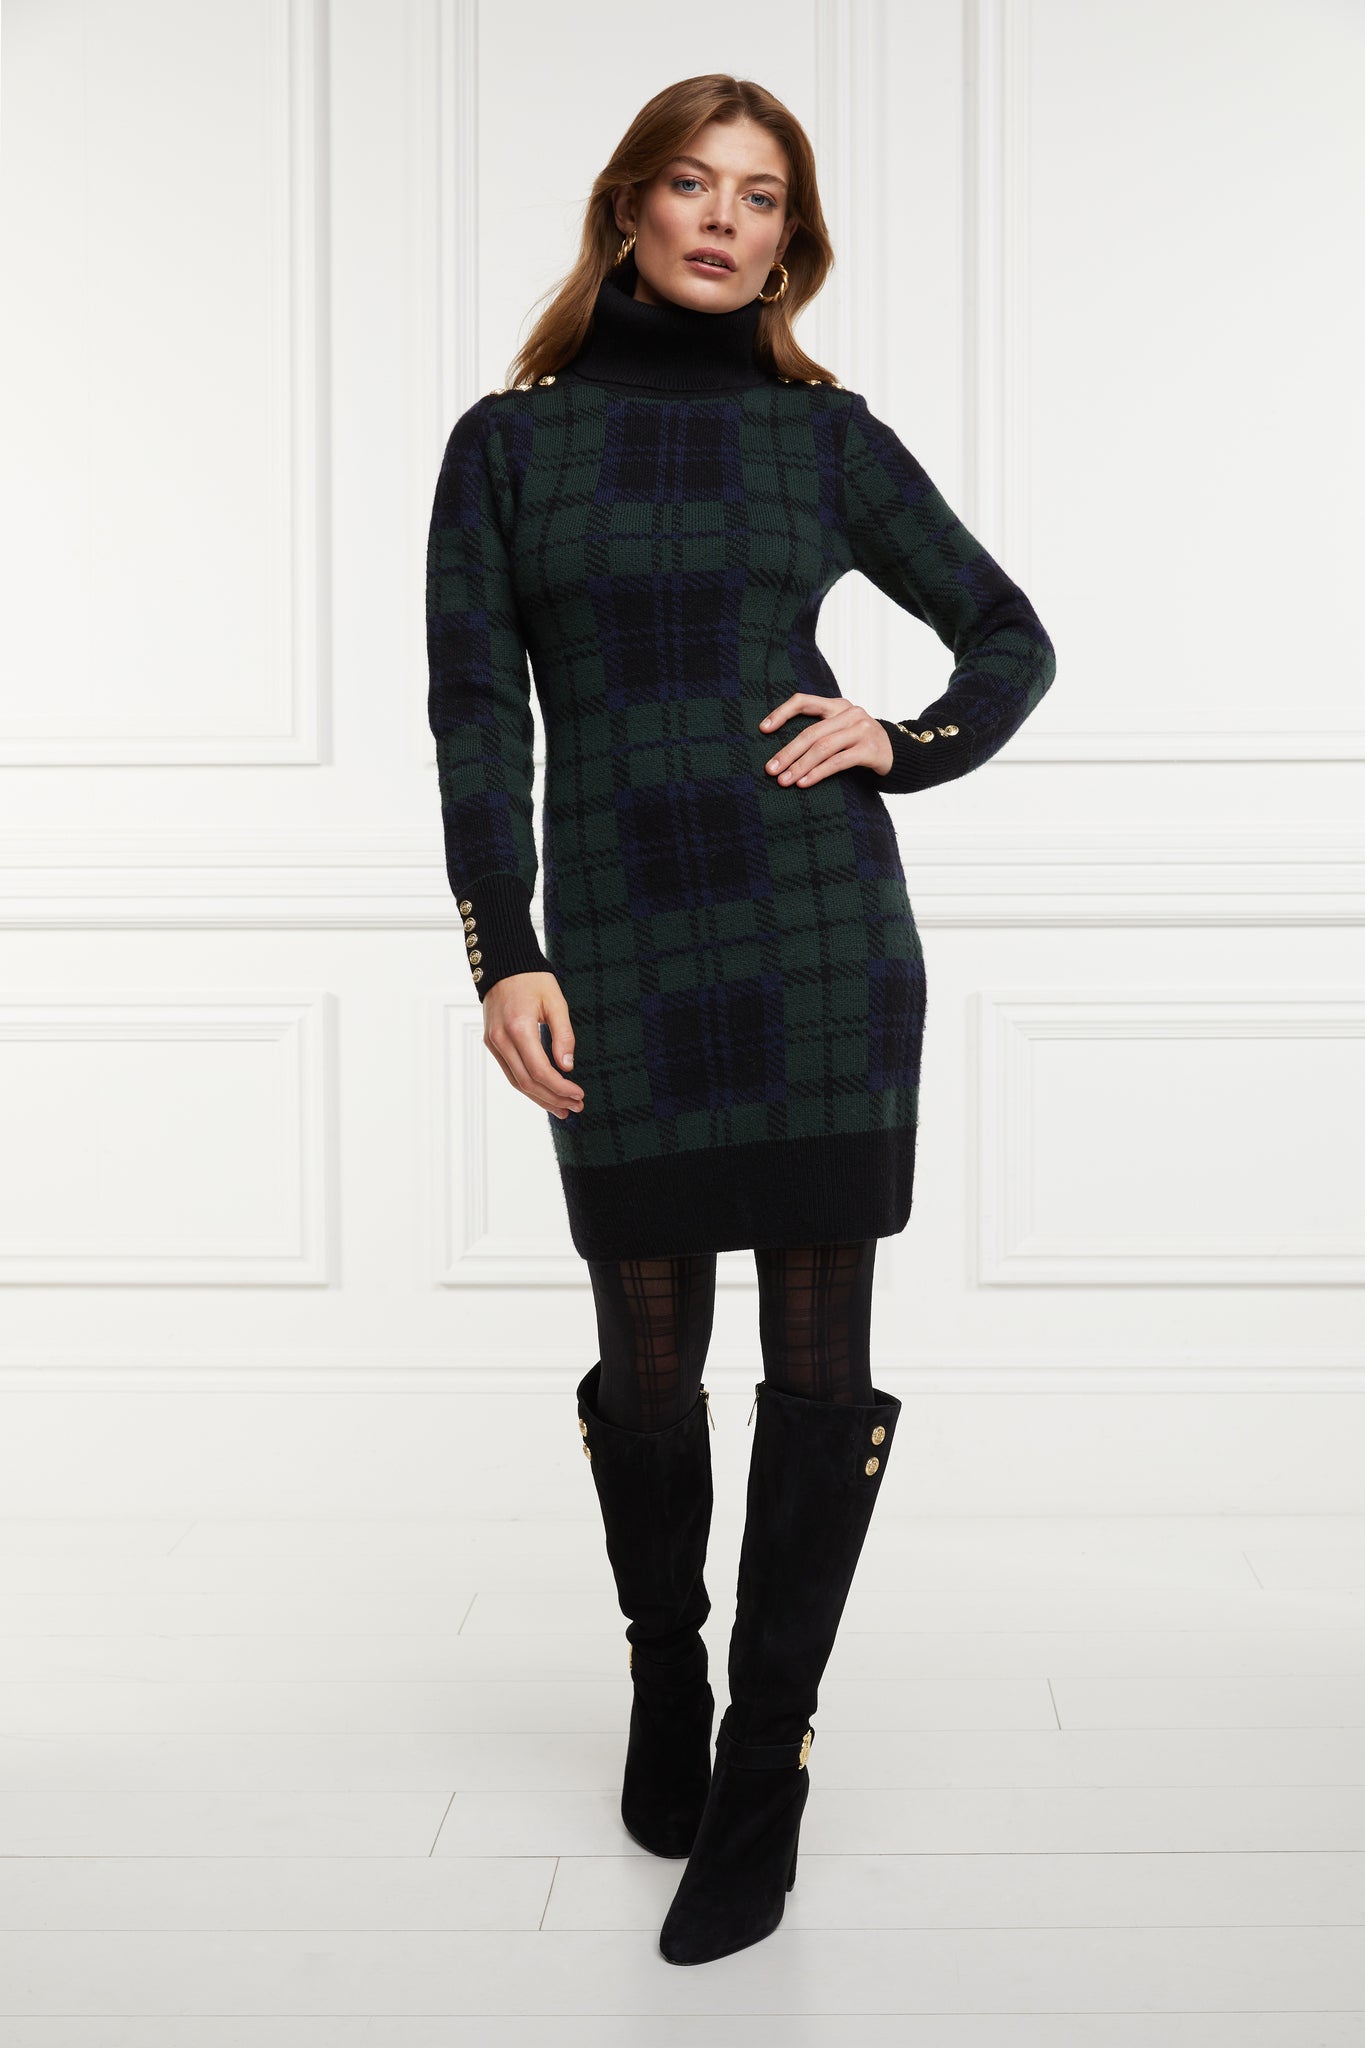 womens green navy and black blackwatch roll neck jumper dress with contrast black cuffs and ribbed hem with gold button detail on the cuffs and shoulder